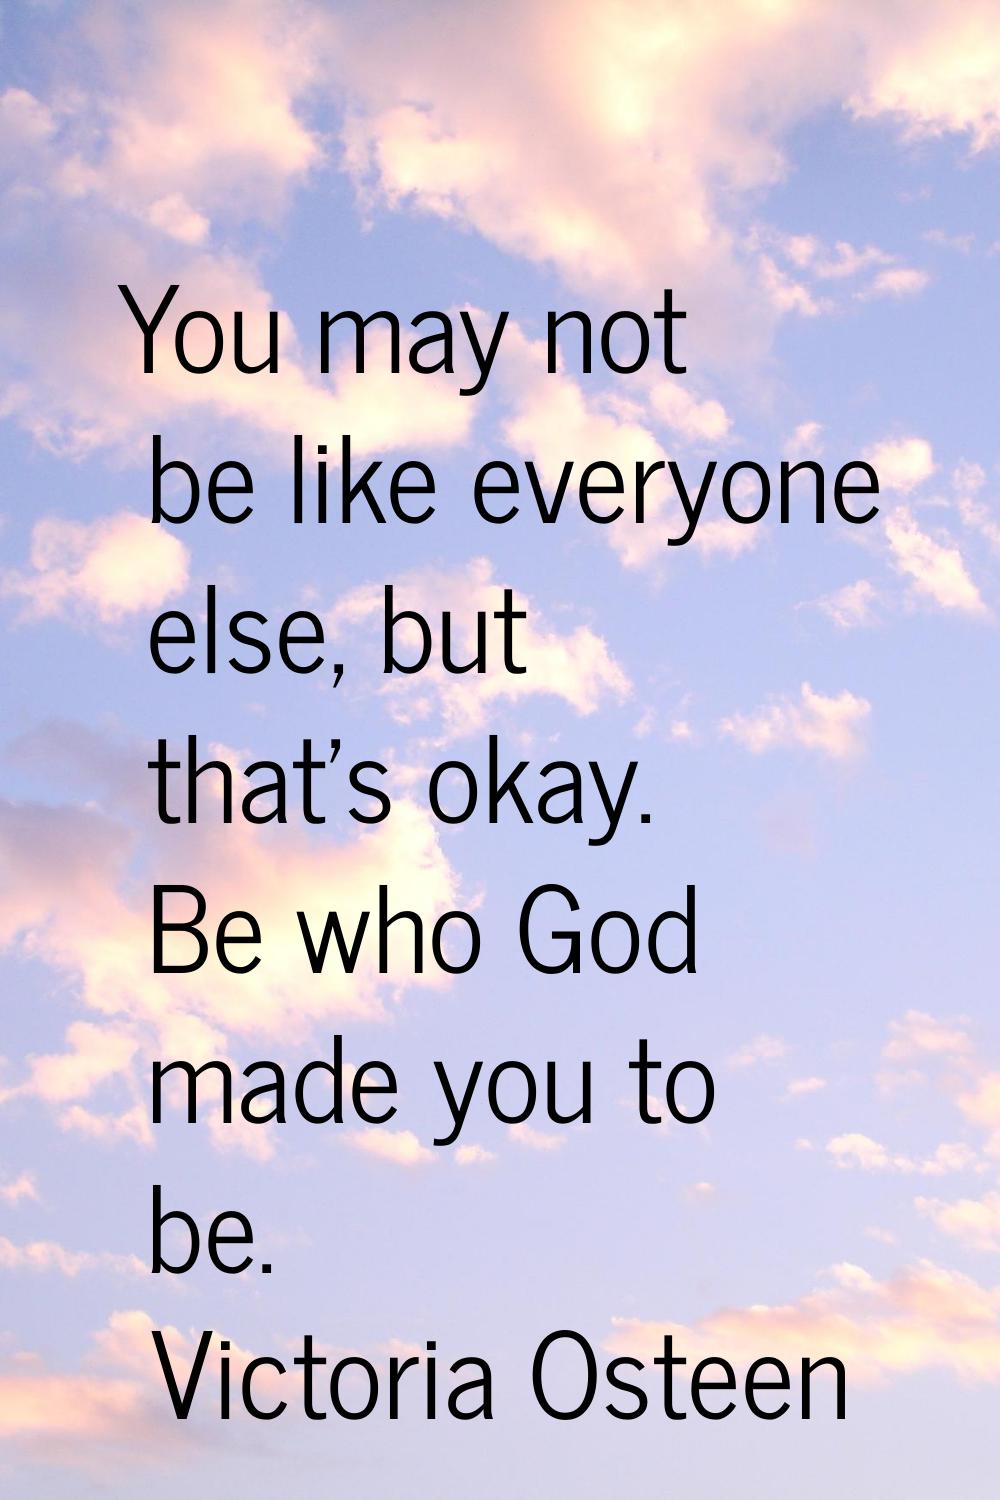 You may not be like everyone else, but that's okay. Be who God made you to be.